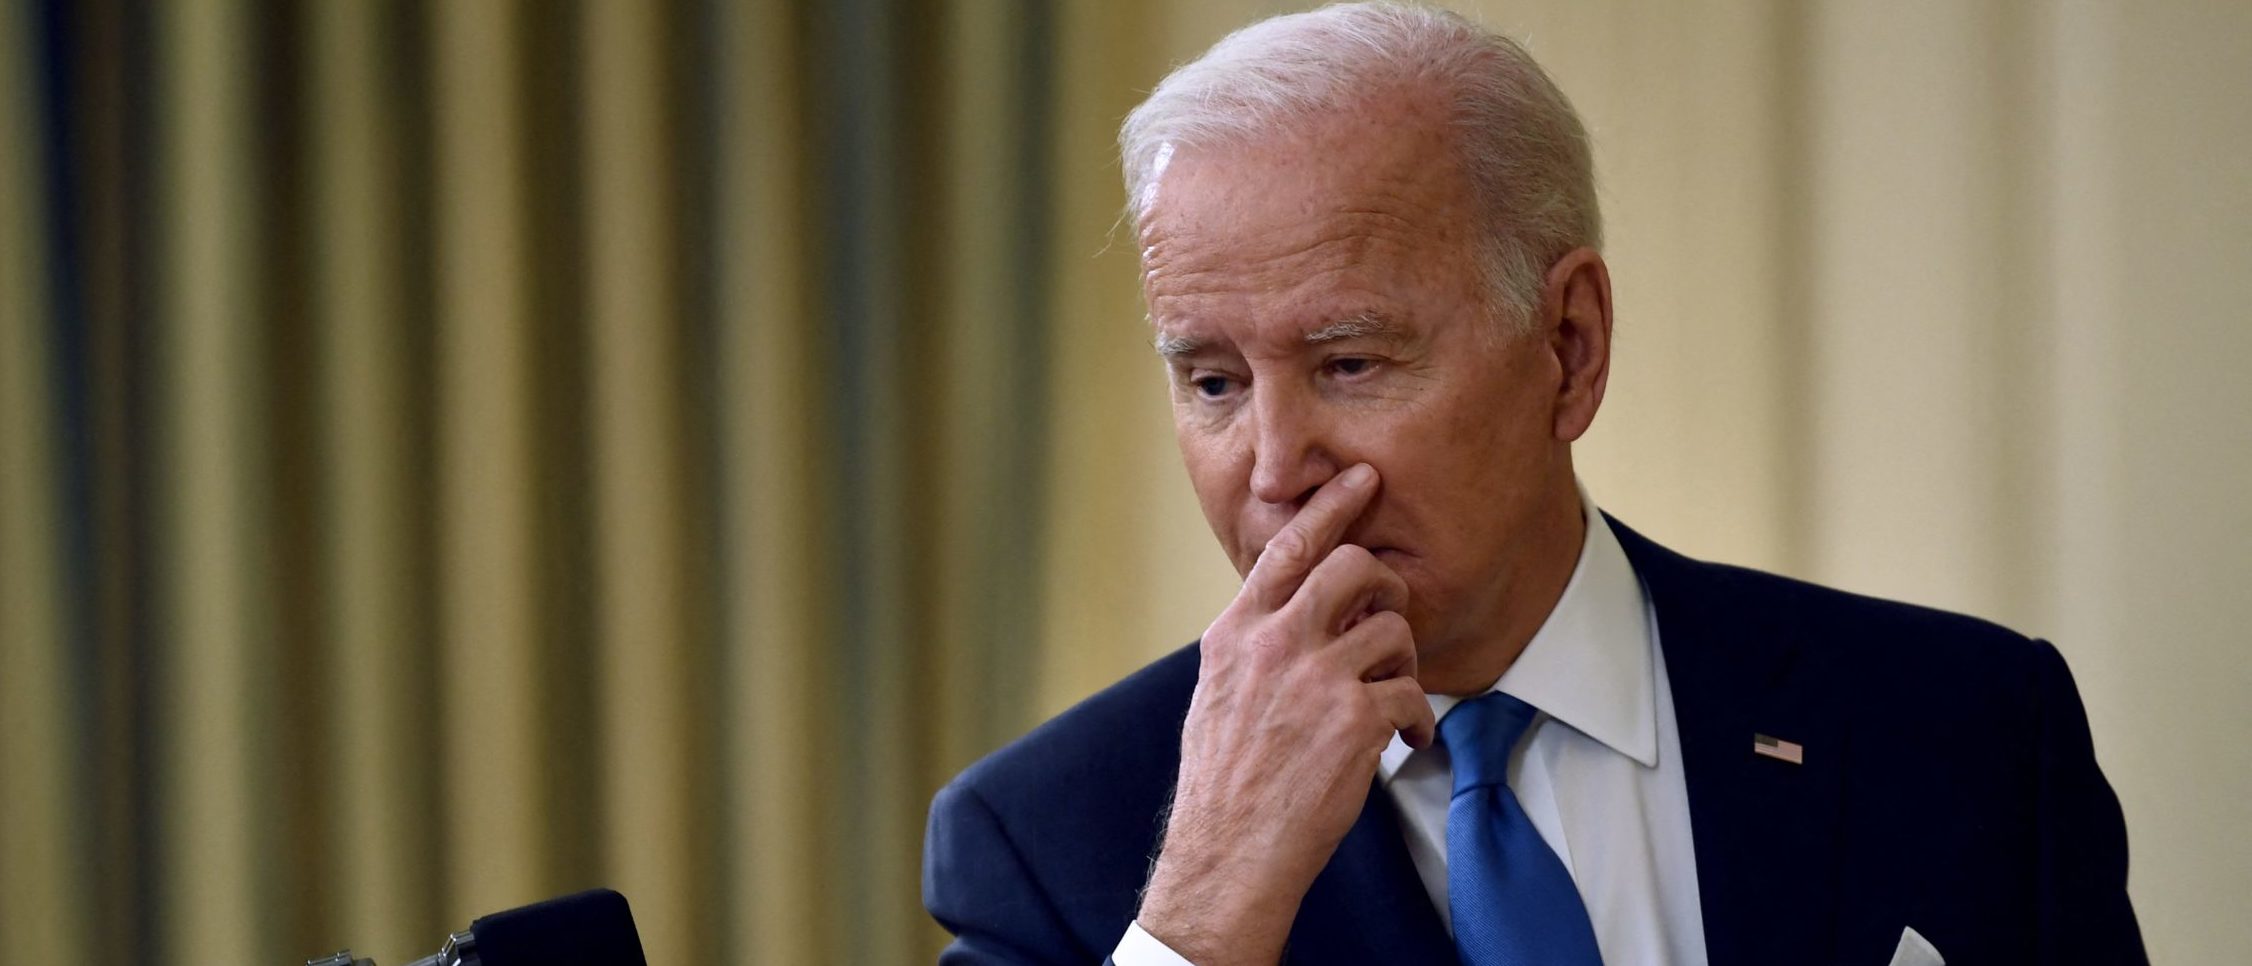 President Joe Biden answers questions after speaking about the status of the country's fight against COVID-19 on Tuesday. (Brendan Smialowski/AFP via Getty Images)